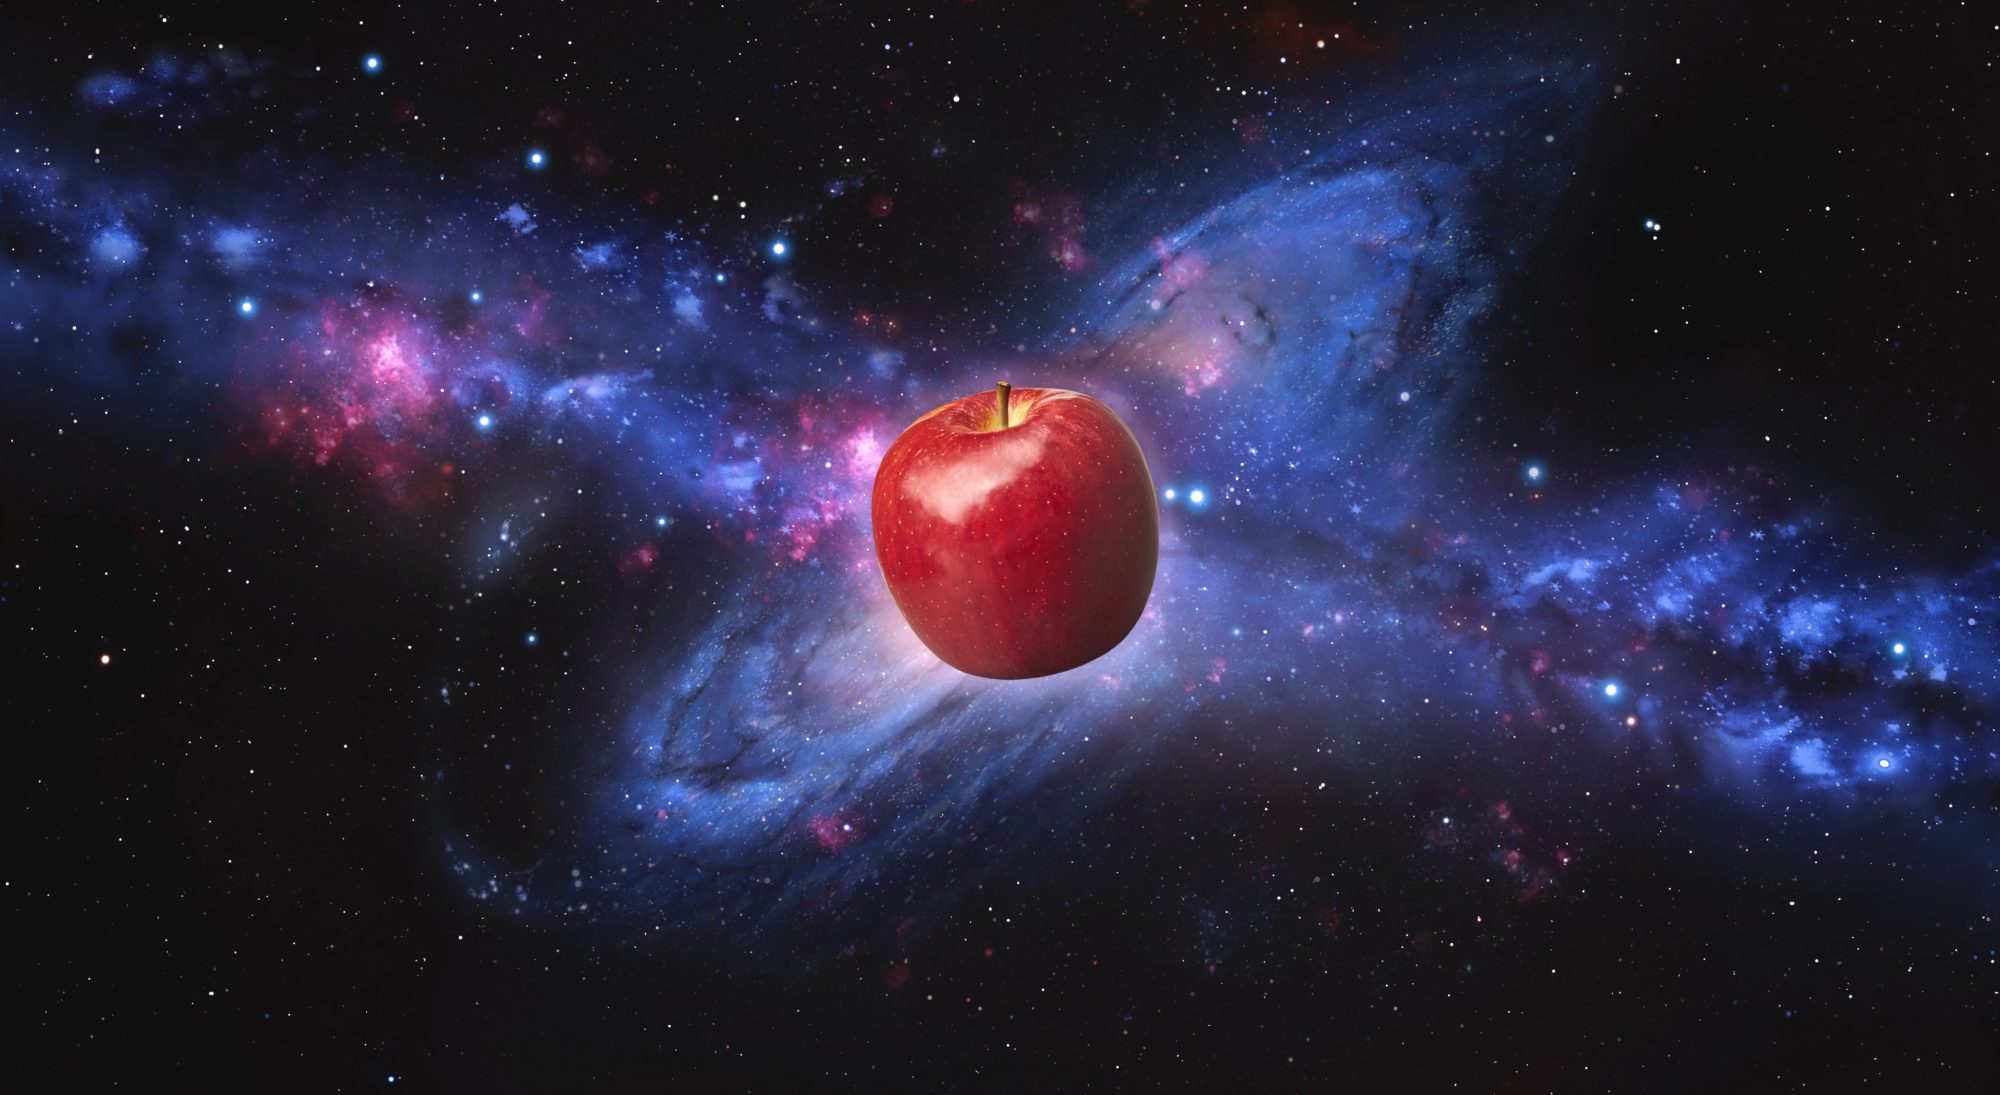 The juicy new starlet of the apple universe is Cosmic Crisp